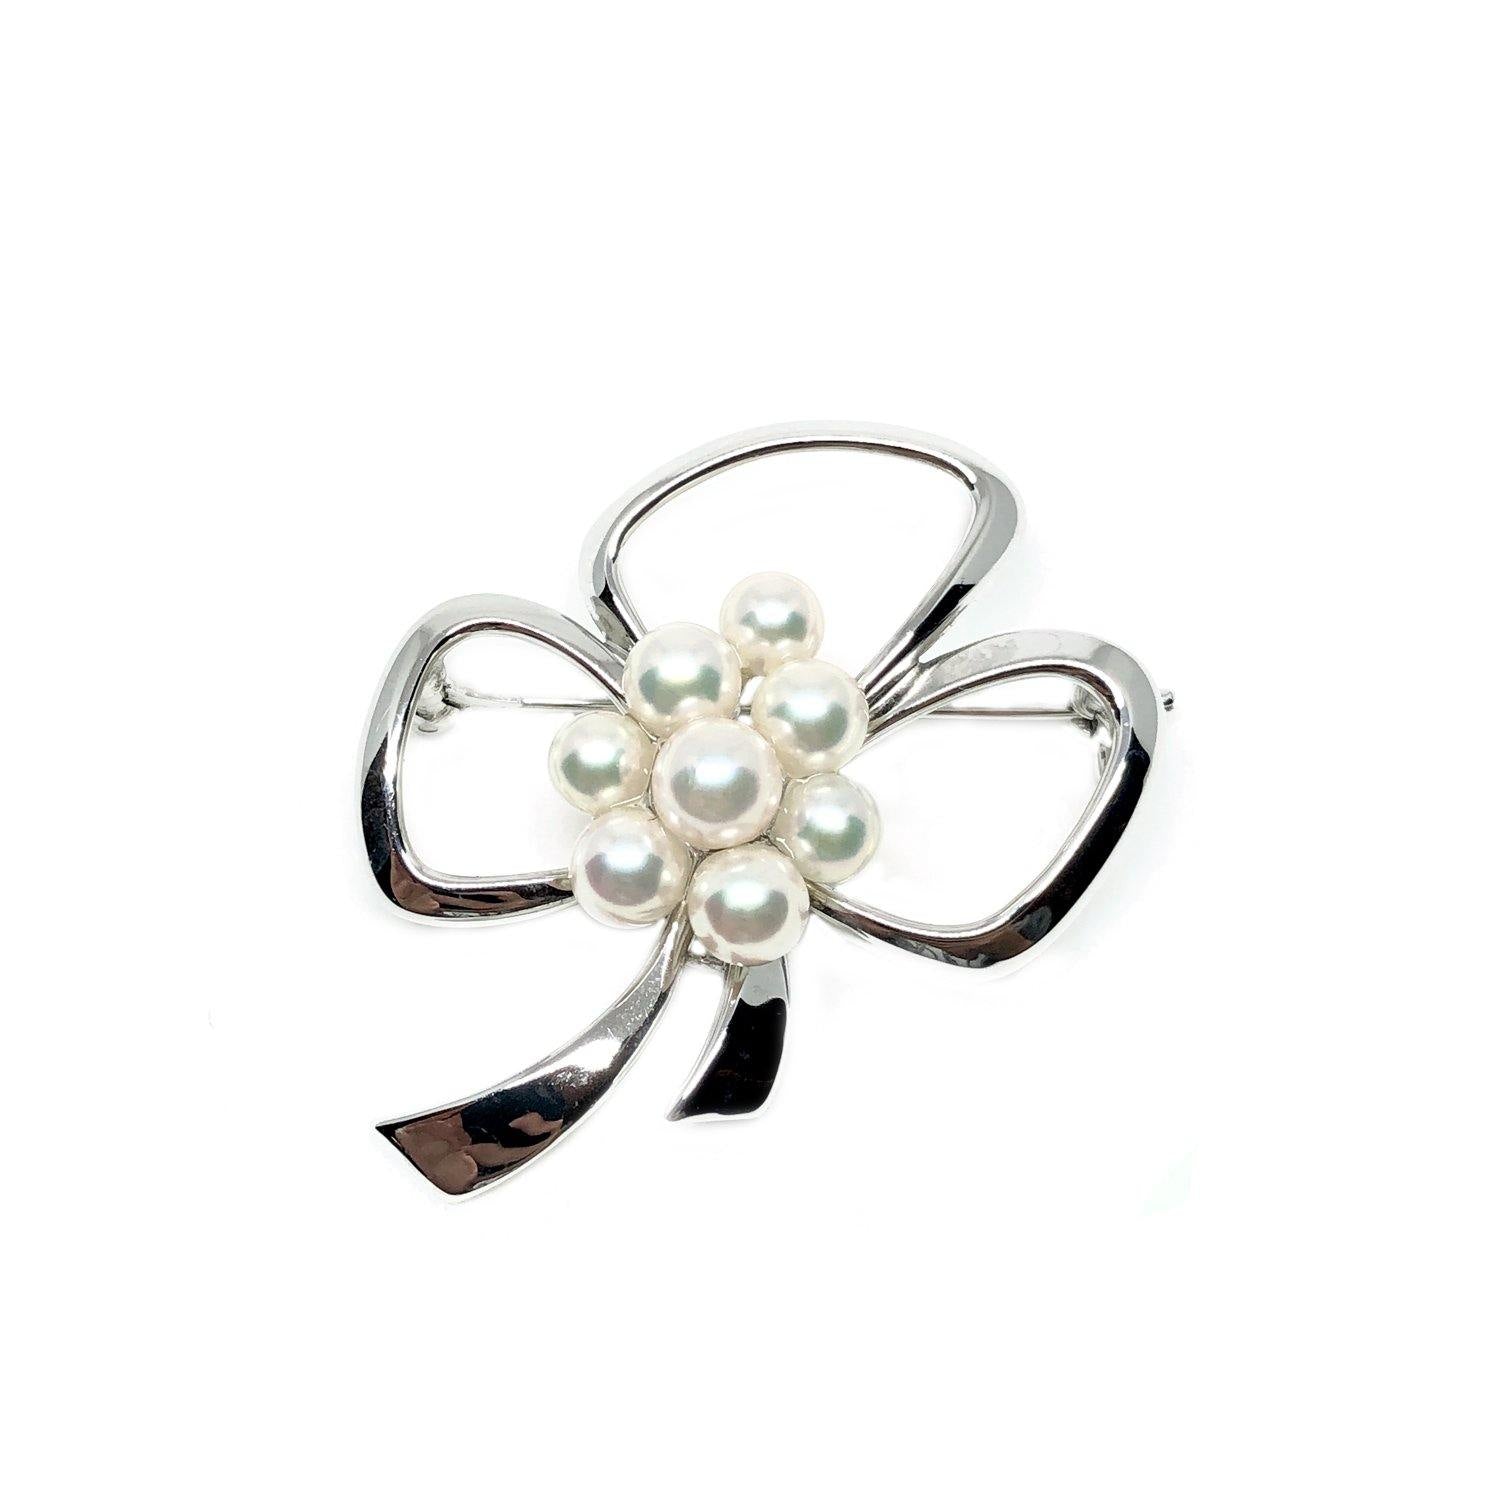 Mikimoto Ribbon Japanese Cultured Saltwater Akoya Pearl Brooch- Sterling Silver